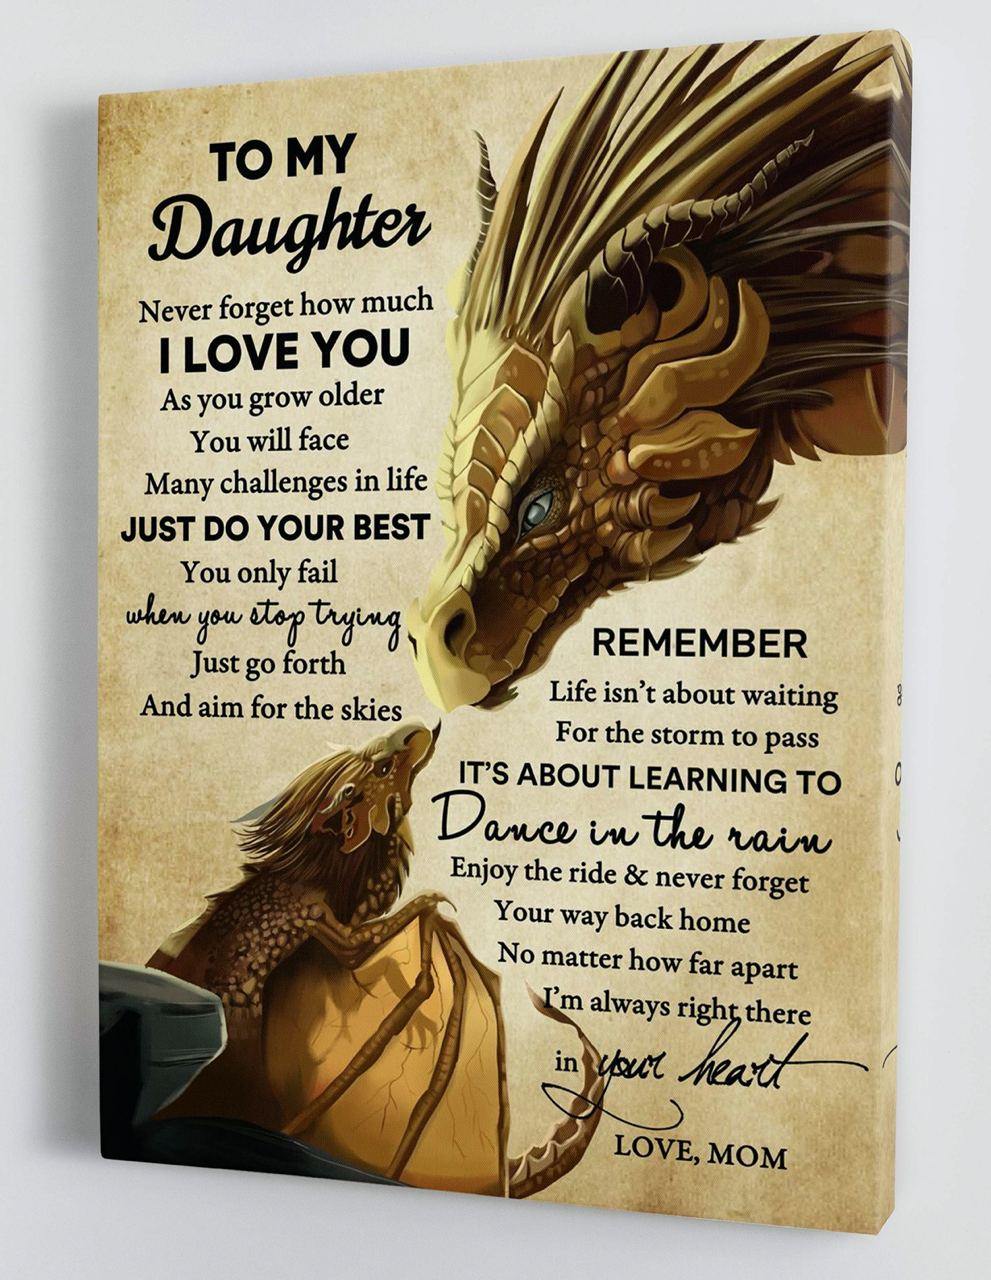 To My Daughter - From Mom - Framed Canvas Gift MD047 - DivesArt LLC